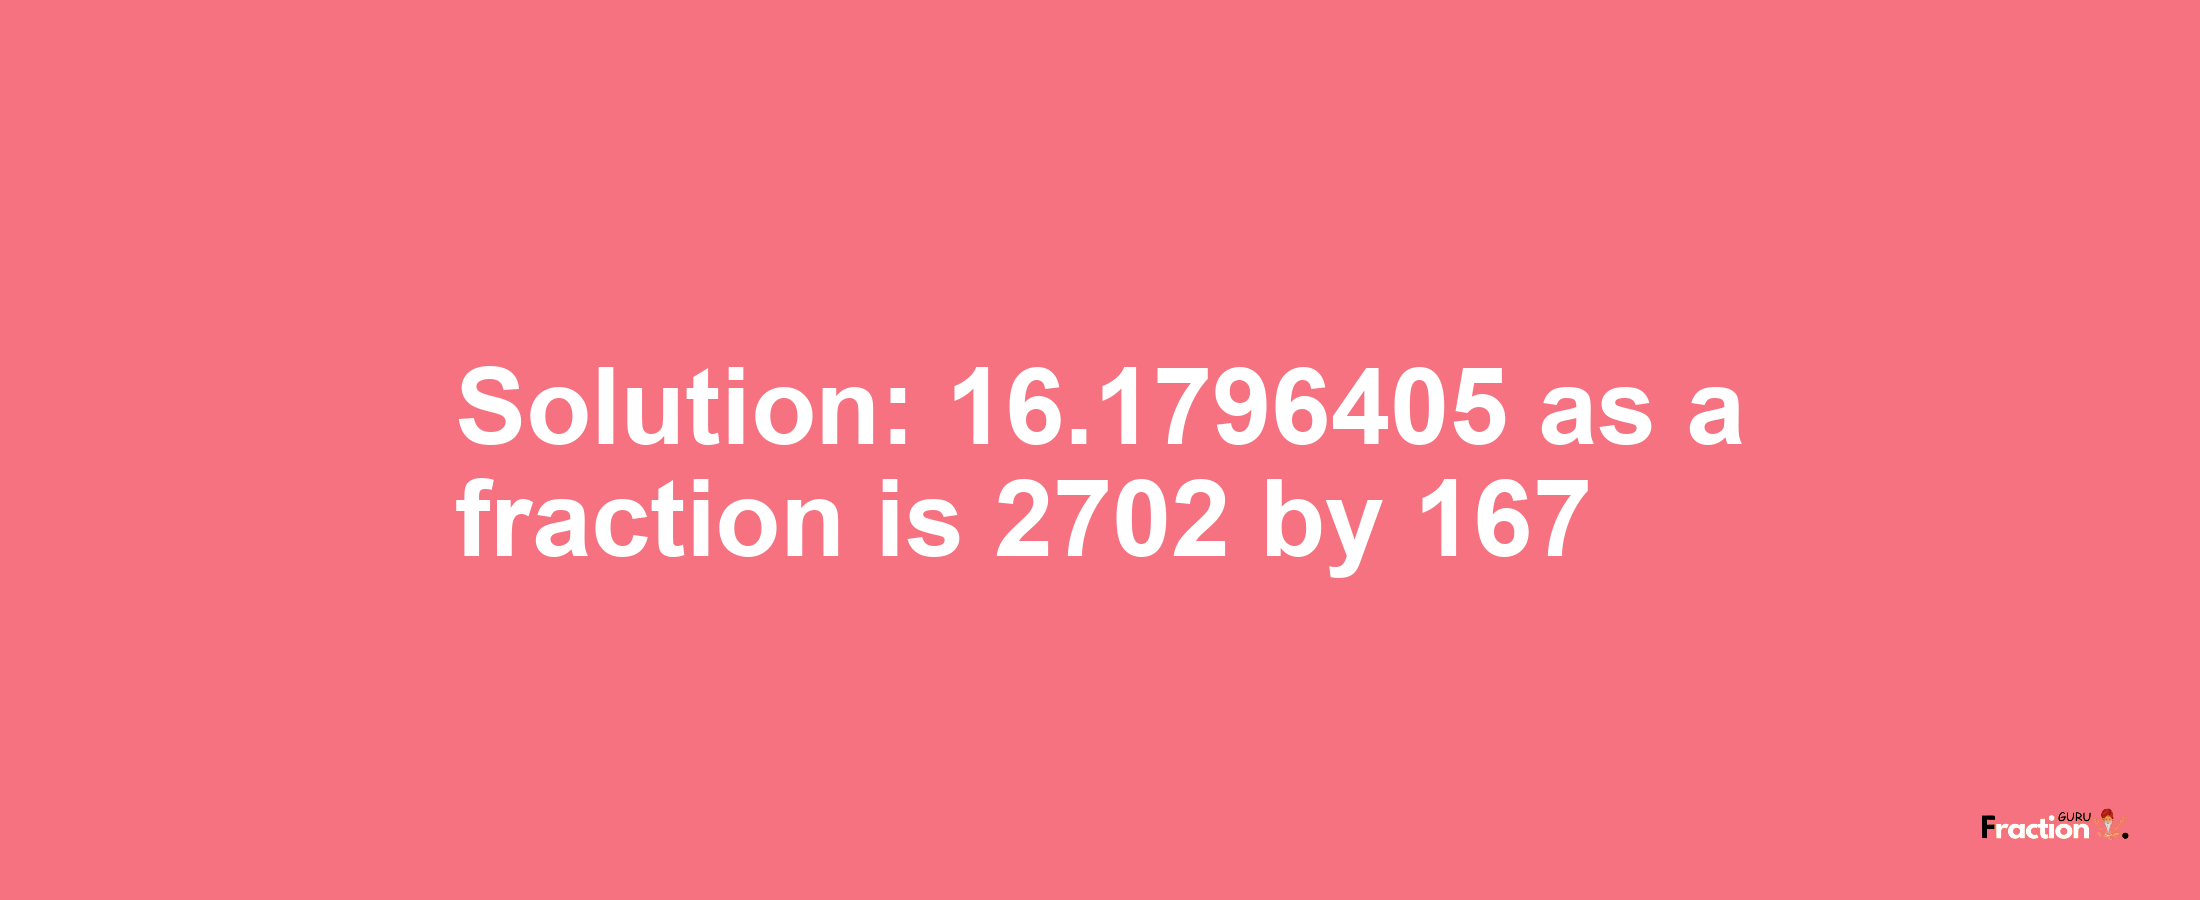 Solution:16.1796405 as a fraction is 2702/167